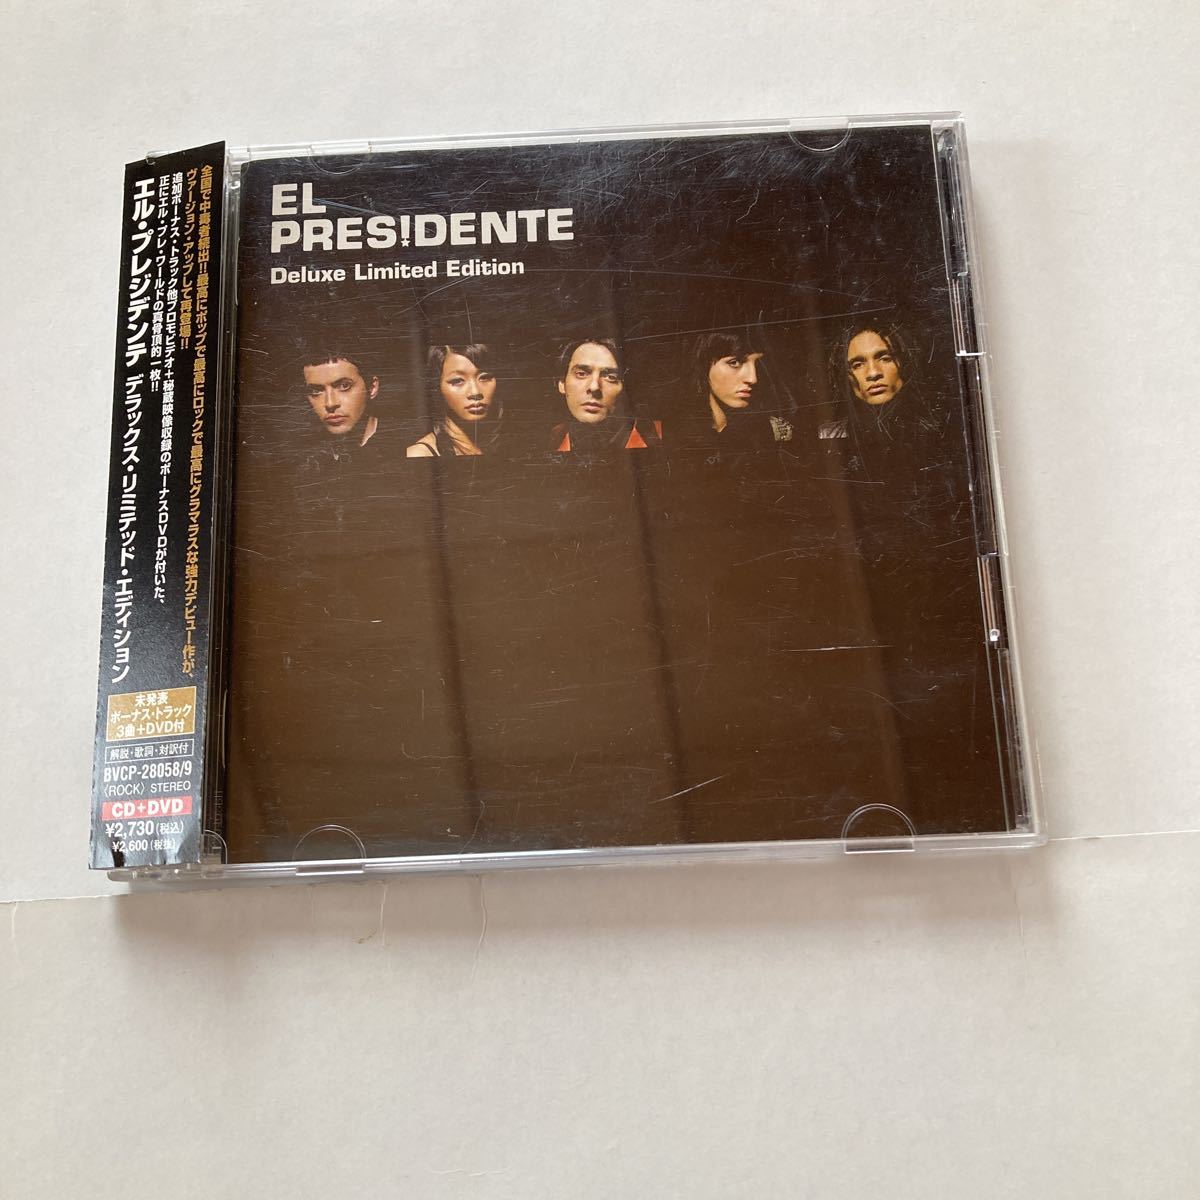 a CD+DVD 国内盤 EL PRESIDENTE エル・プレジデンテ Deluxe Limited Edition WITHOUT YOU プリンスのカヴァー曲 ラズベリー・ベレー収録_画像1